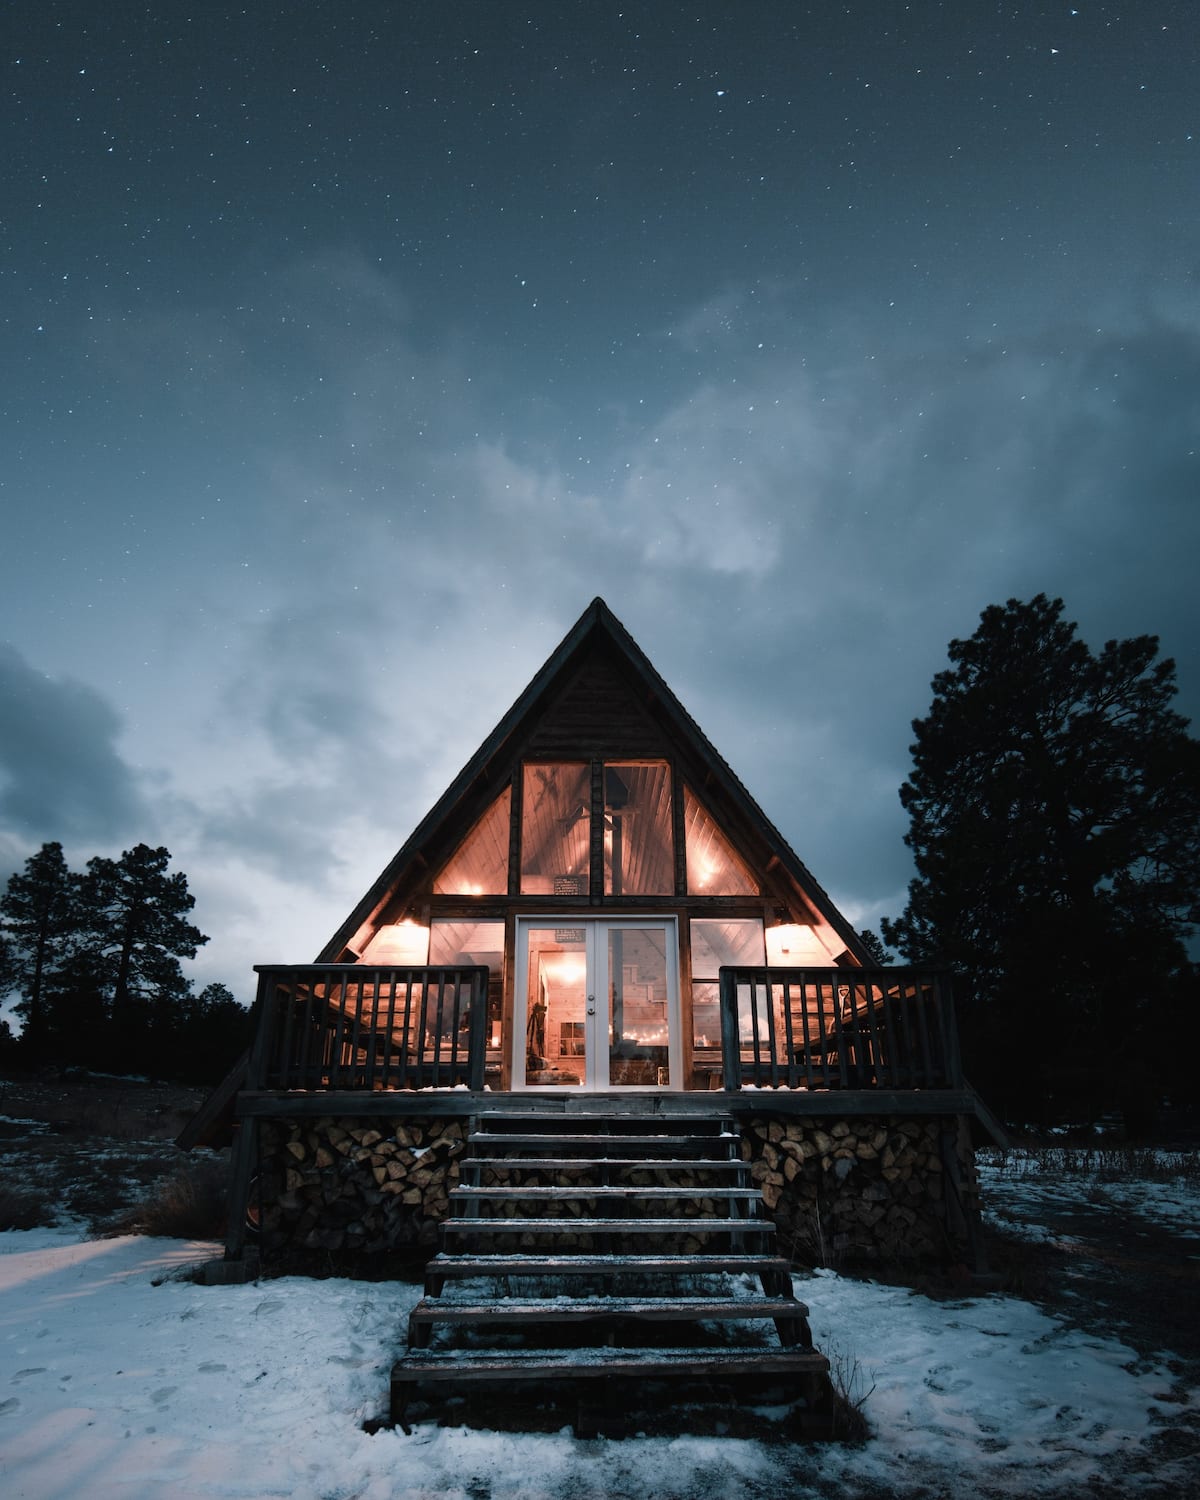 This A-Frame mountain view cabin is one of the best cabins in Arizona